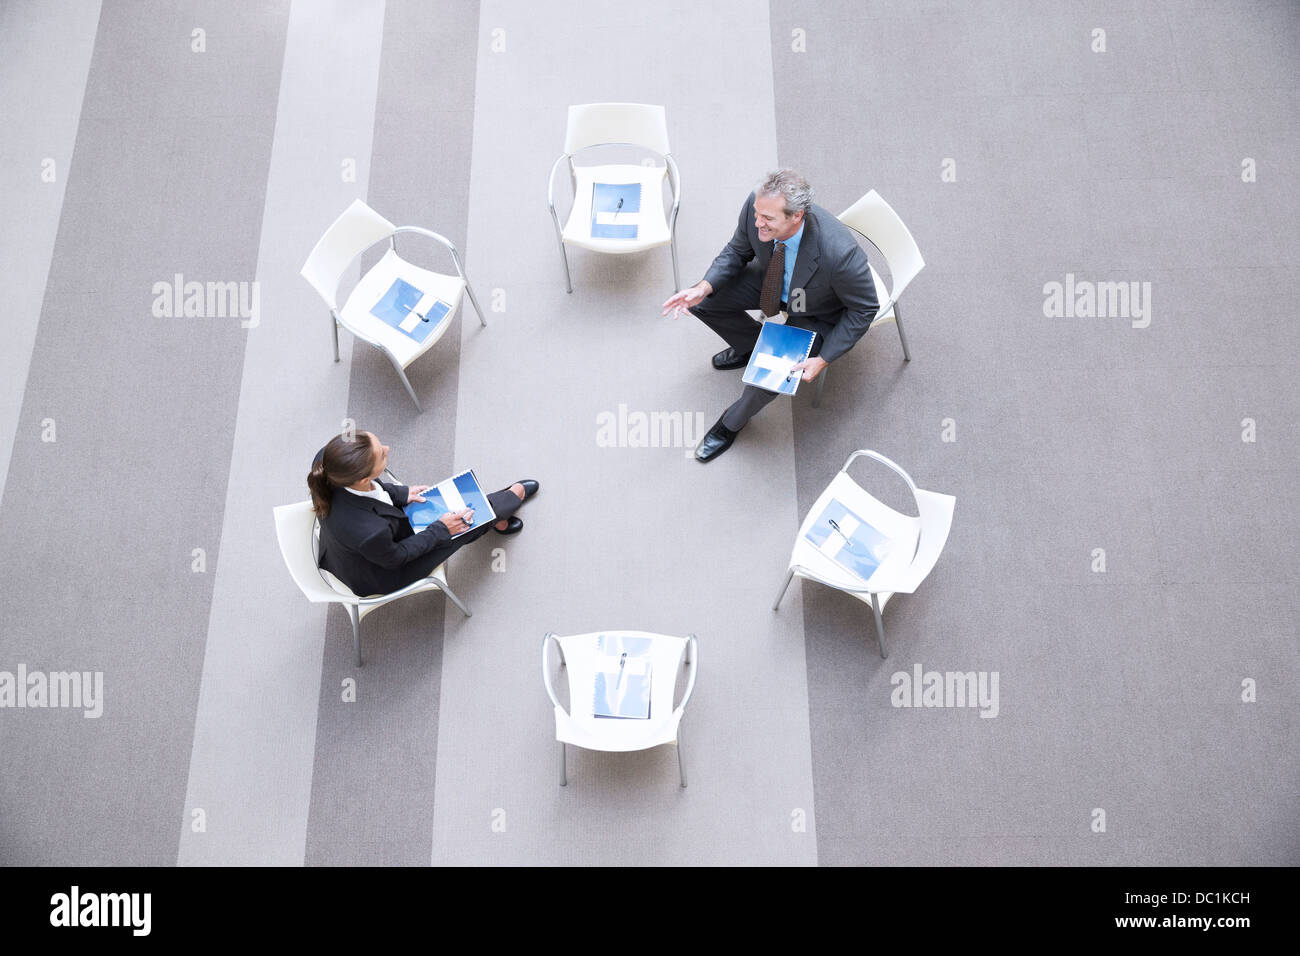 High angle view of businessman and businesswoman talking at chairs in circle Stock Photo